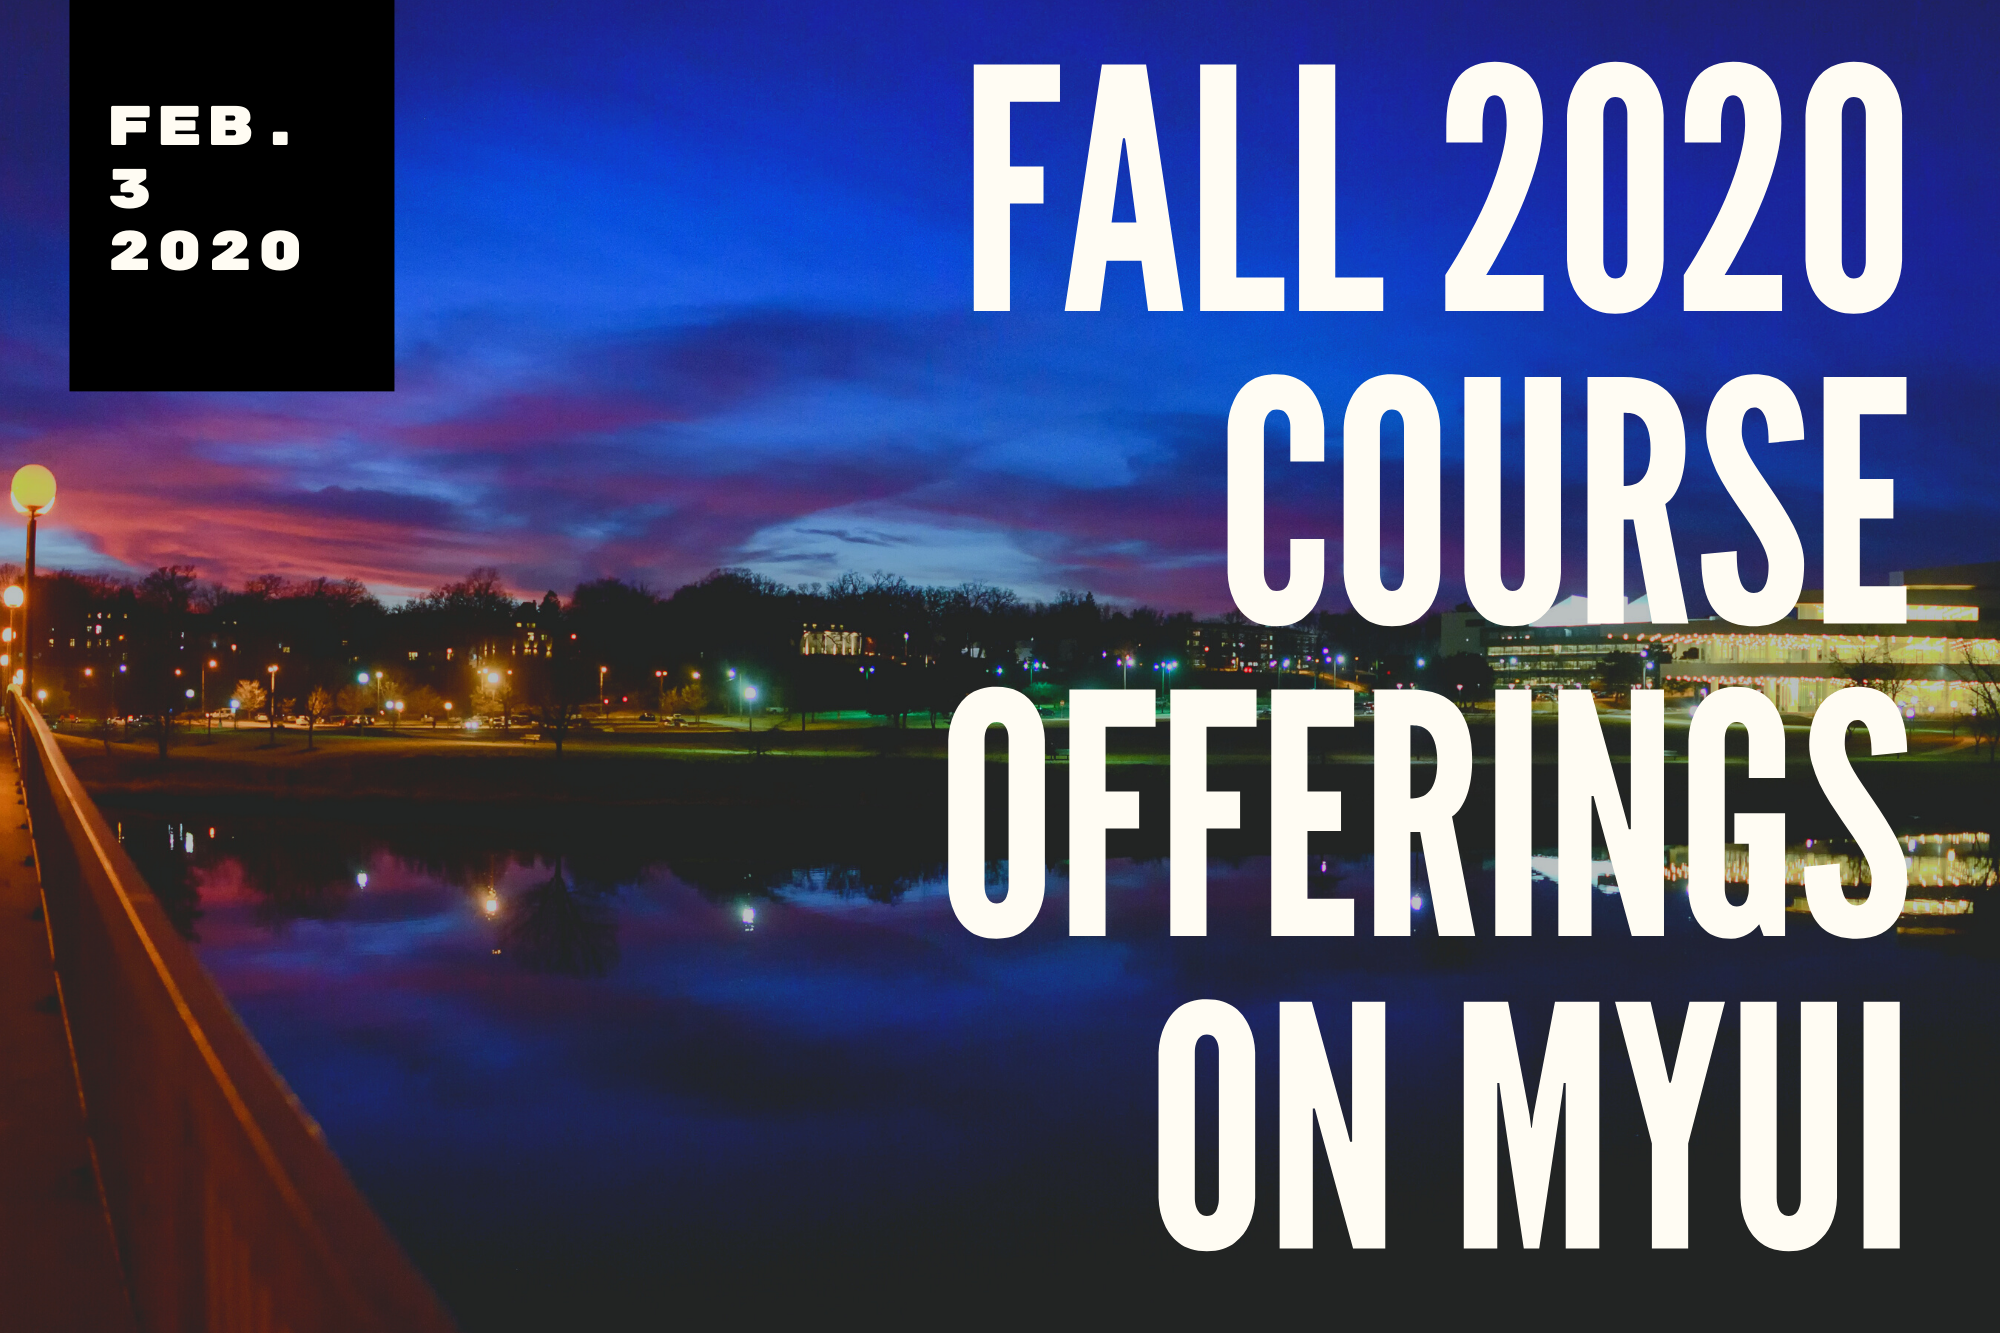 Fall 2020 Course offerings